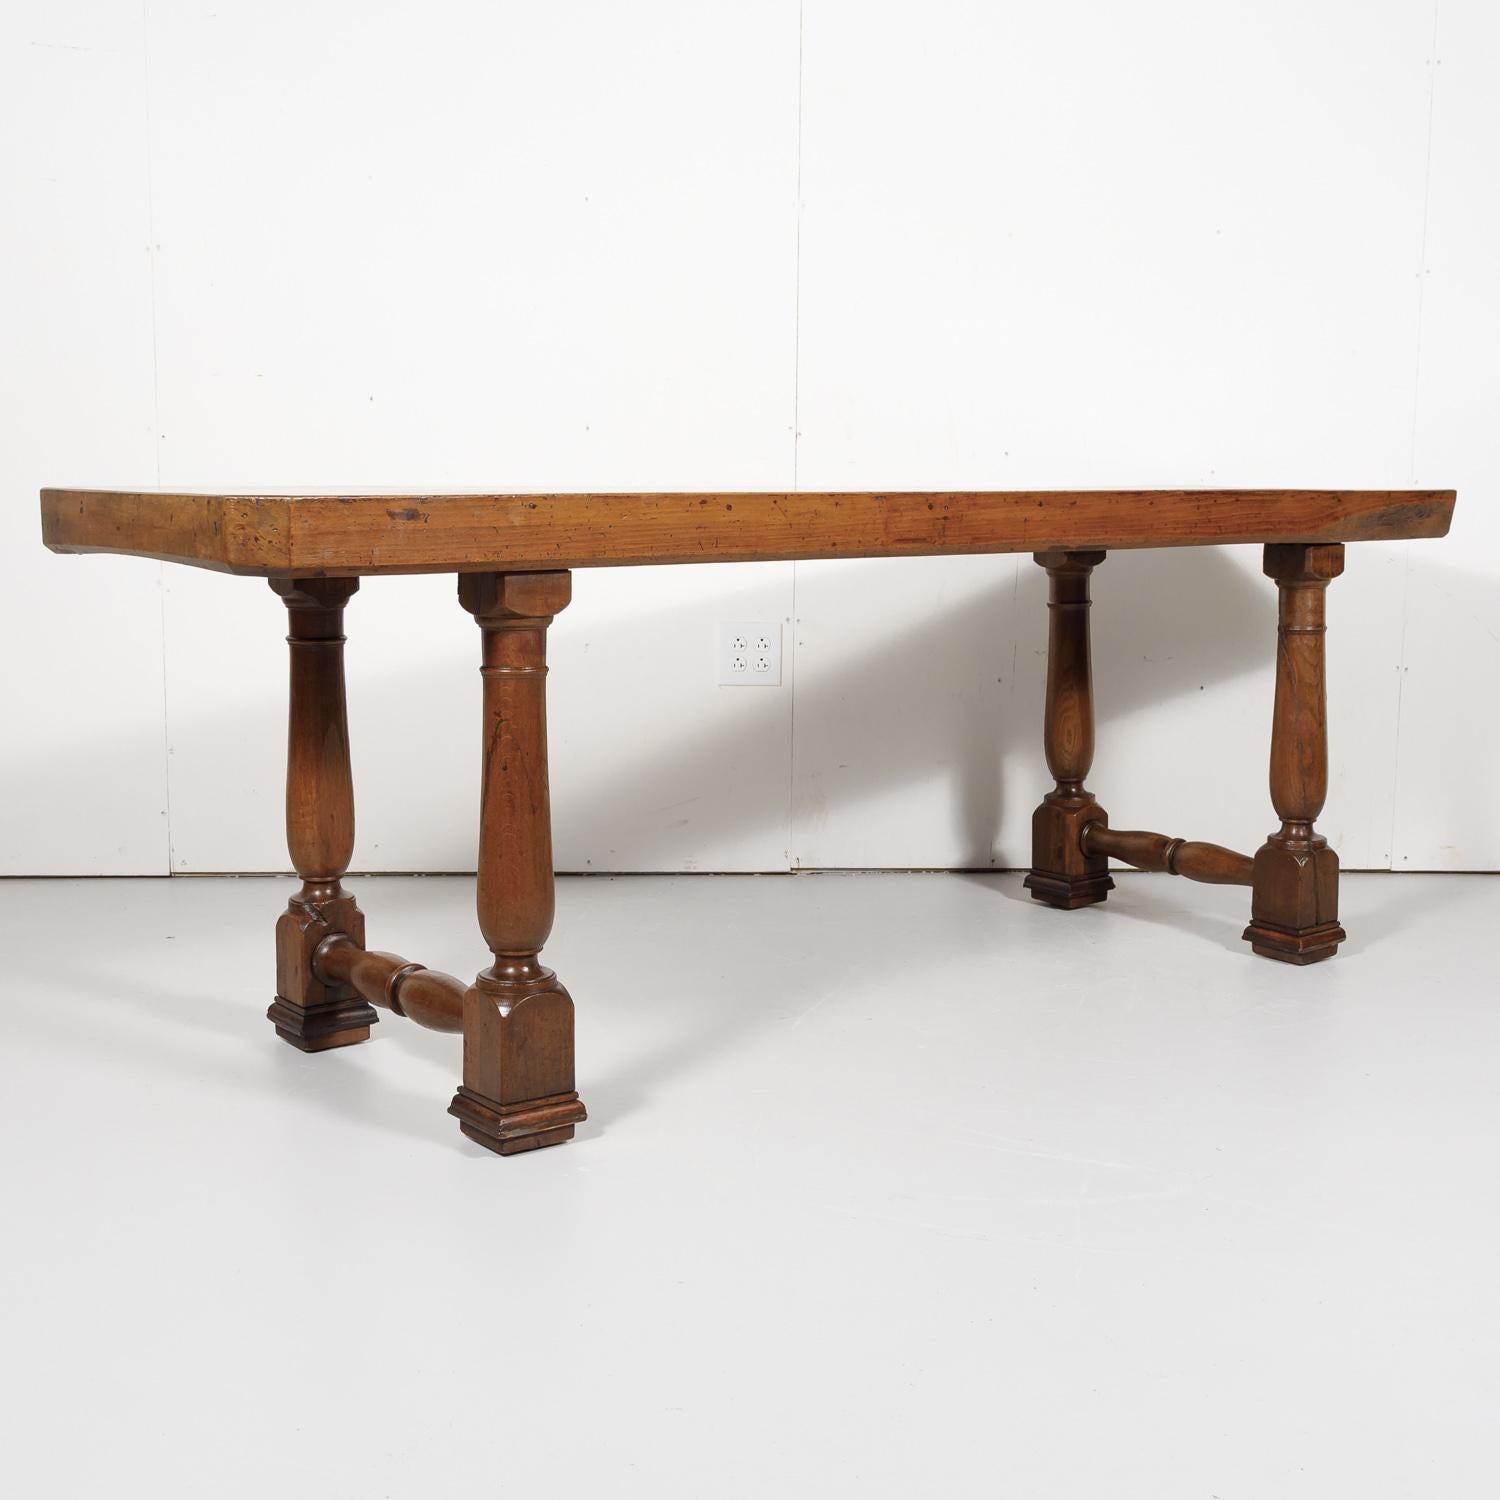 18th century provincial console or dining table handcrafted near Arles of solid old growth French walnut having a rectangular top with canted corners, circa 1770s. The 3.5